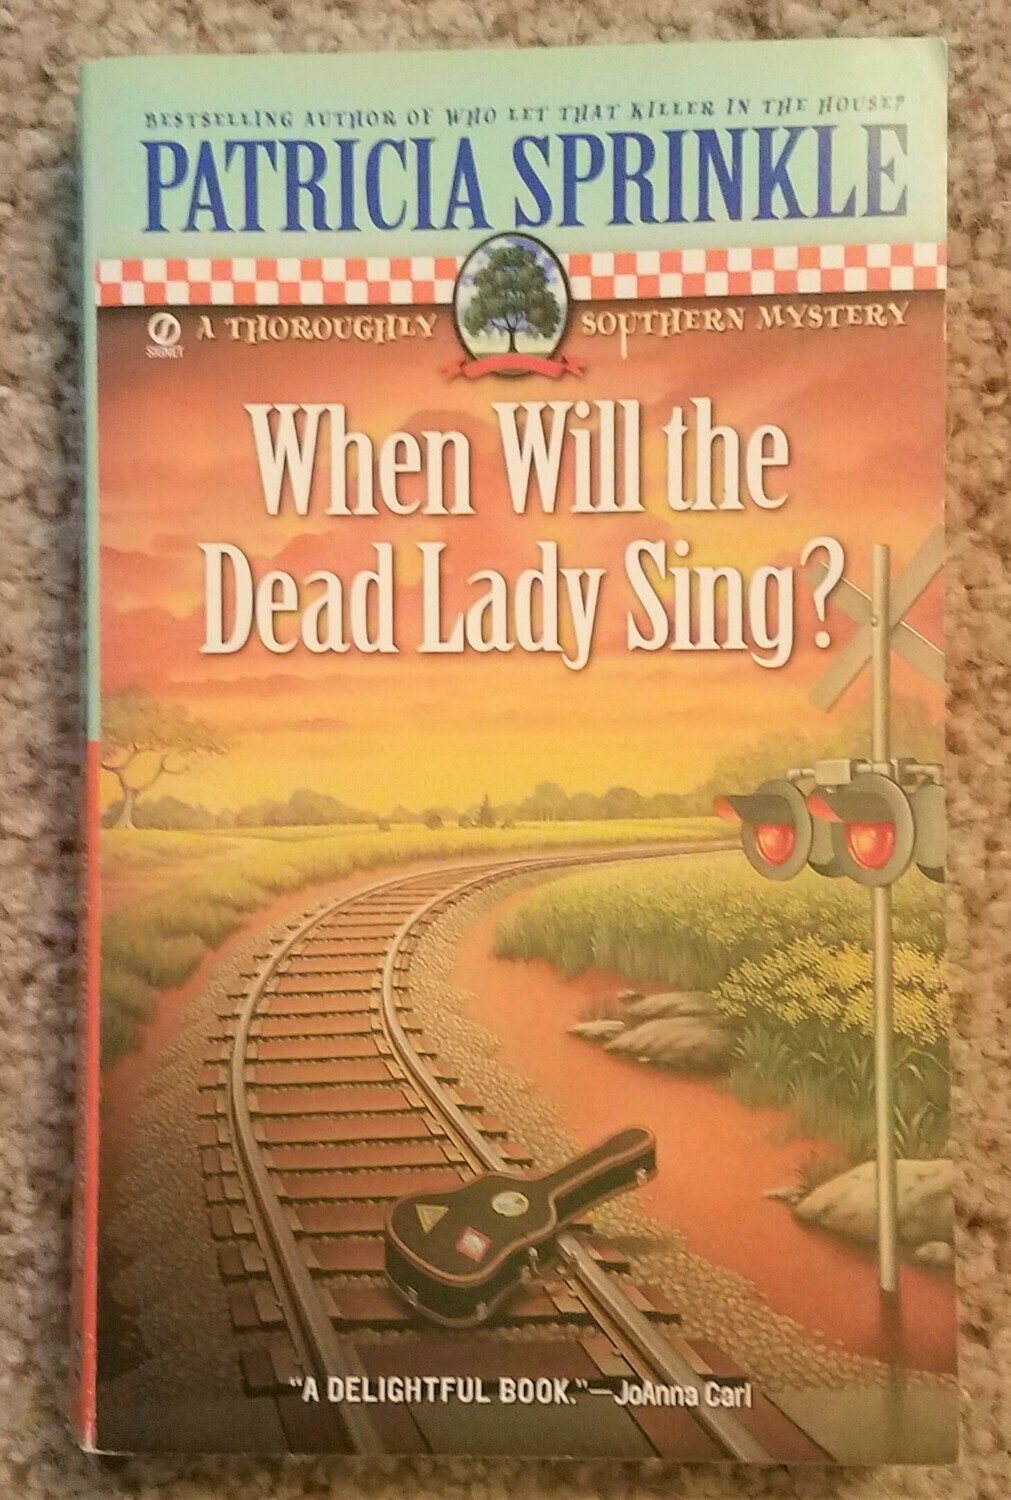 When Will the Dead Lady Sing? by Patricia Sprinkle